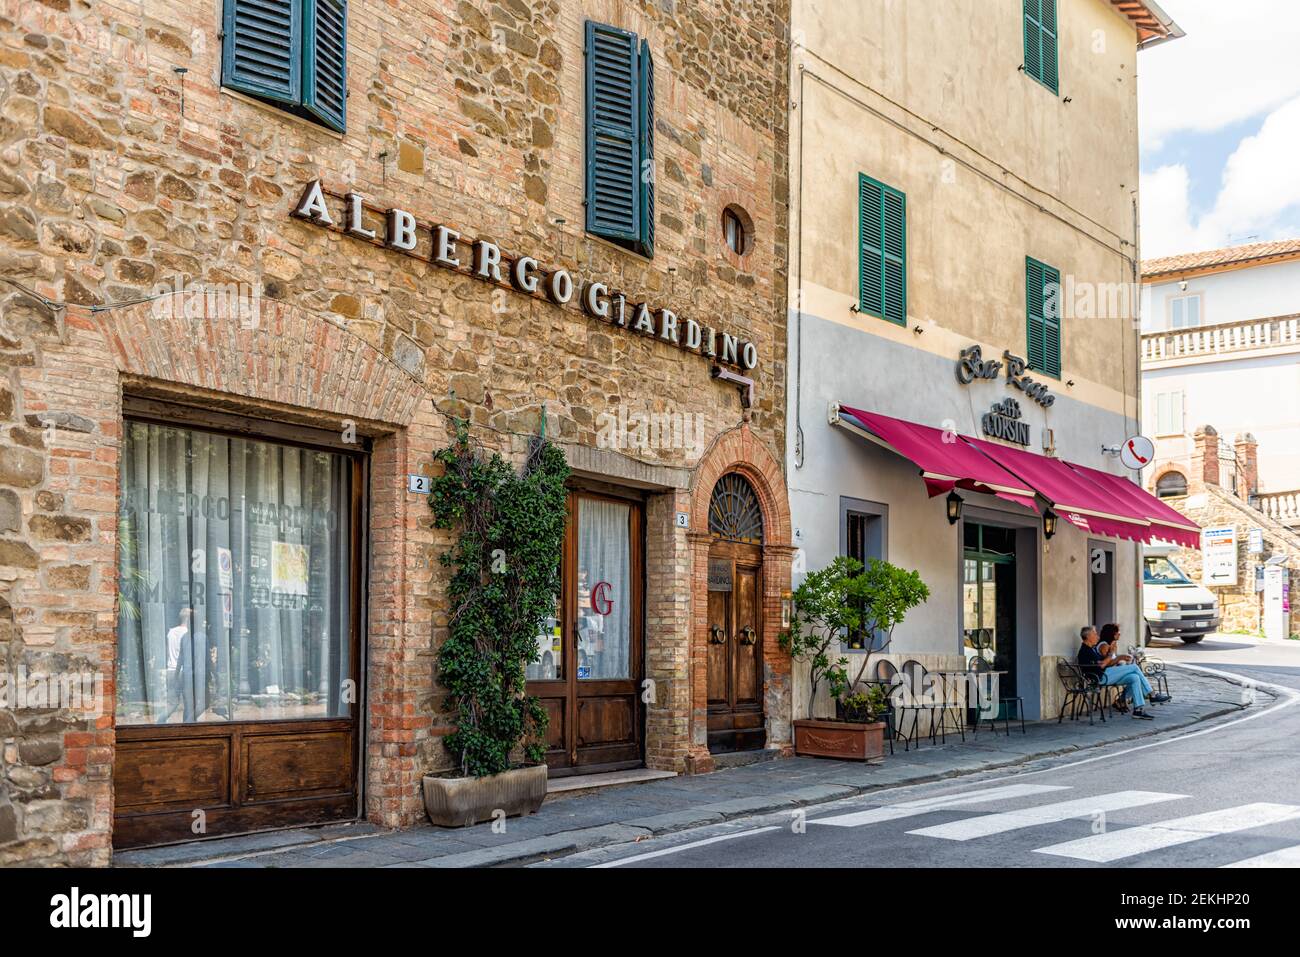 Montalcino, Italy - August 26, 2018: Street in town village in Tuscany during summer and cafe restaurant store with sign for Albergo Giardino hotel Stock Photo